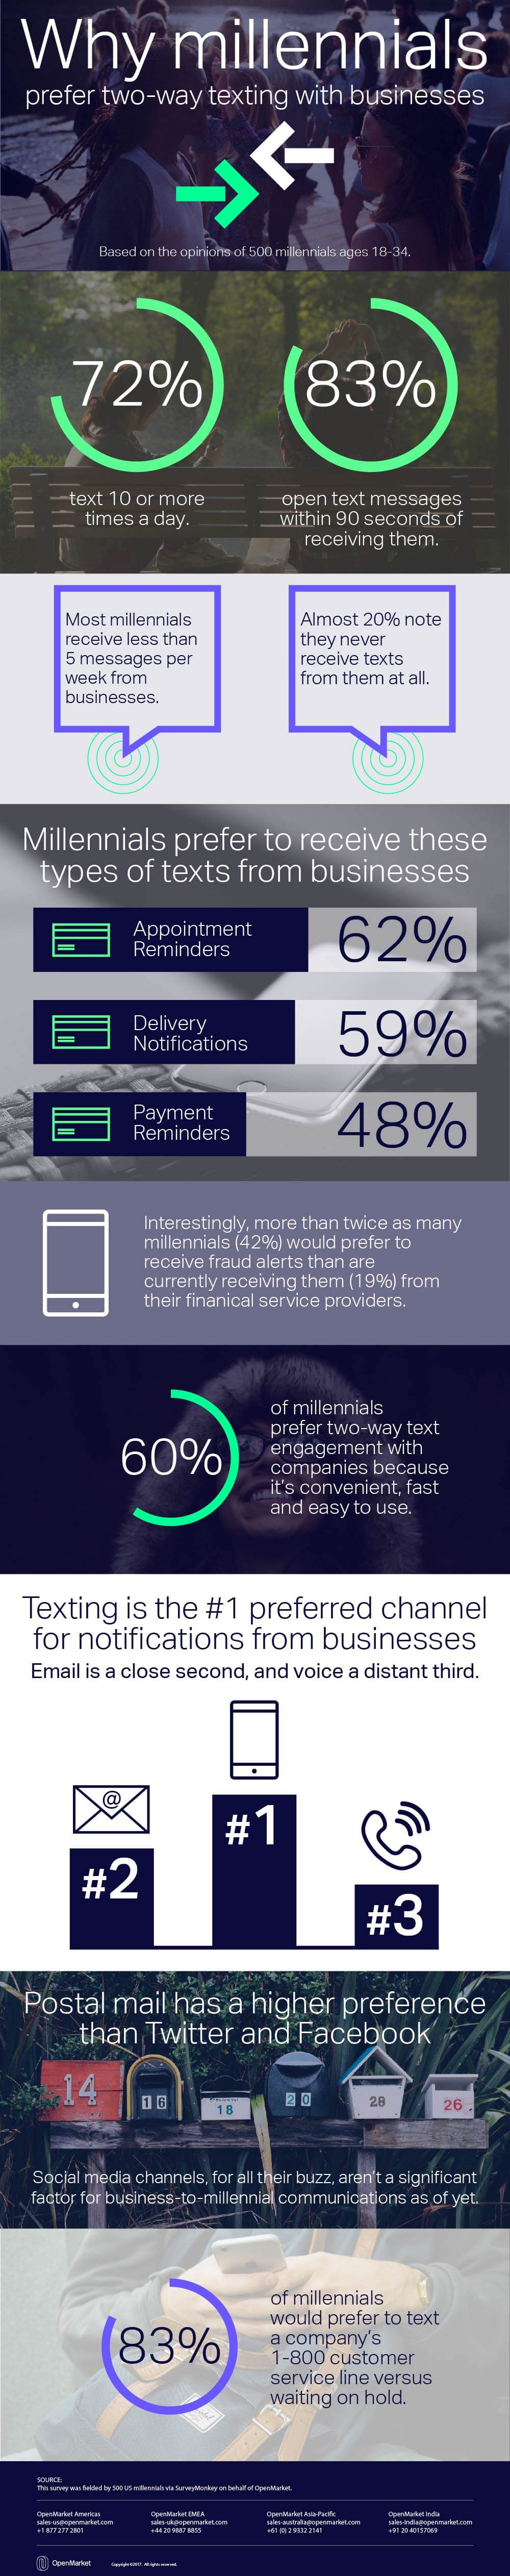 Why millennials prefer two-way texting infographic